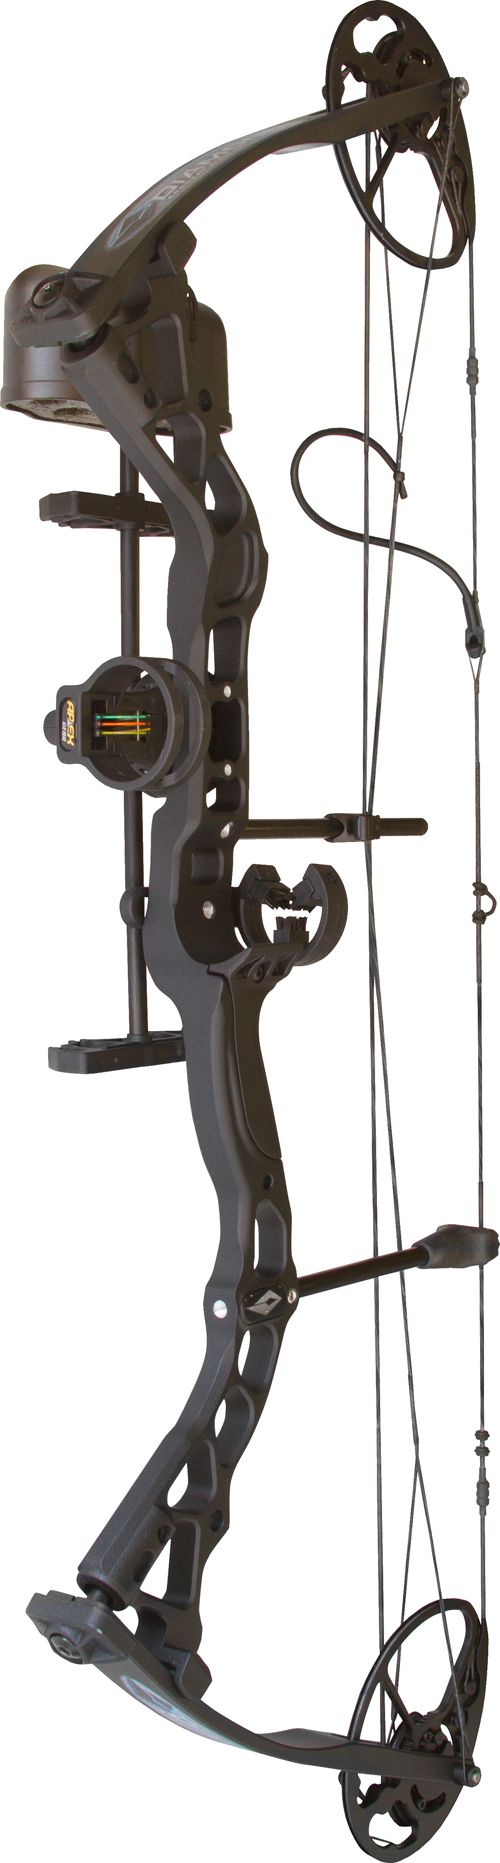 Diamond Infinite Edge RTH Compound Bow Package - Mossy Oak Infinity